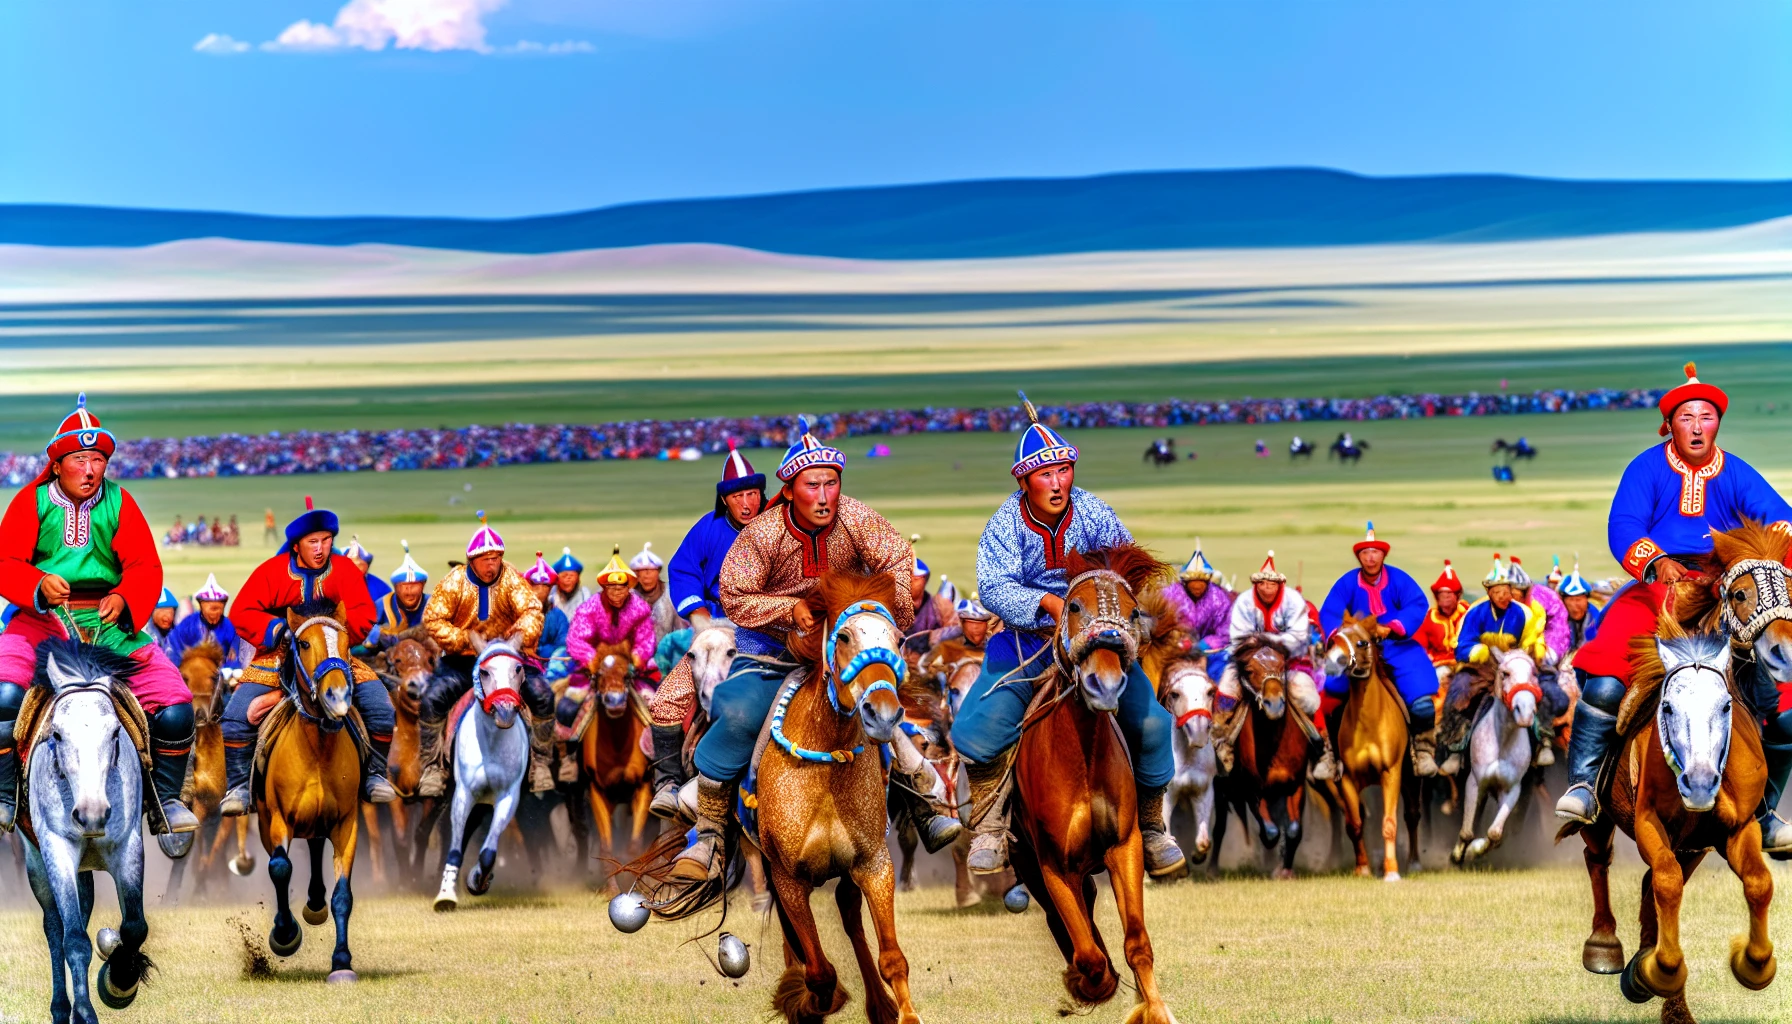 Traditional horse race at the Naadam Festival in Mongolia